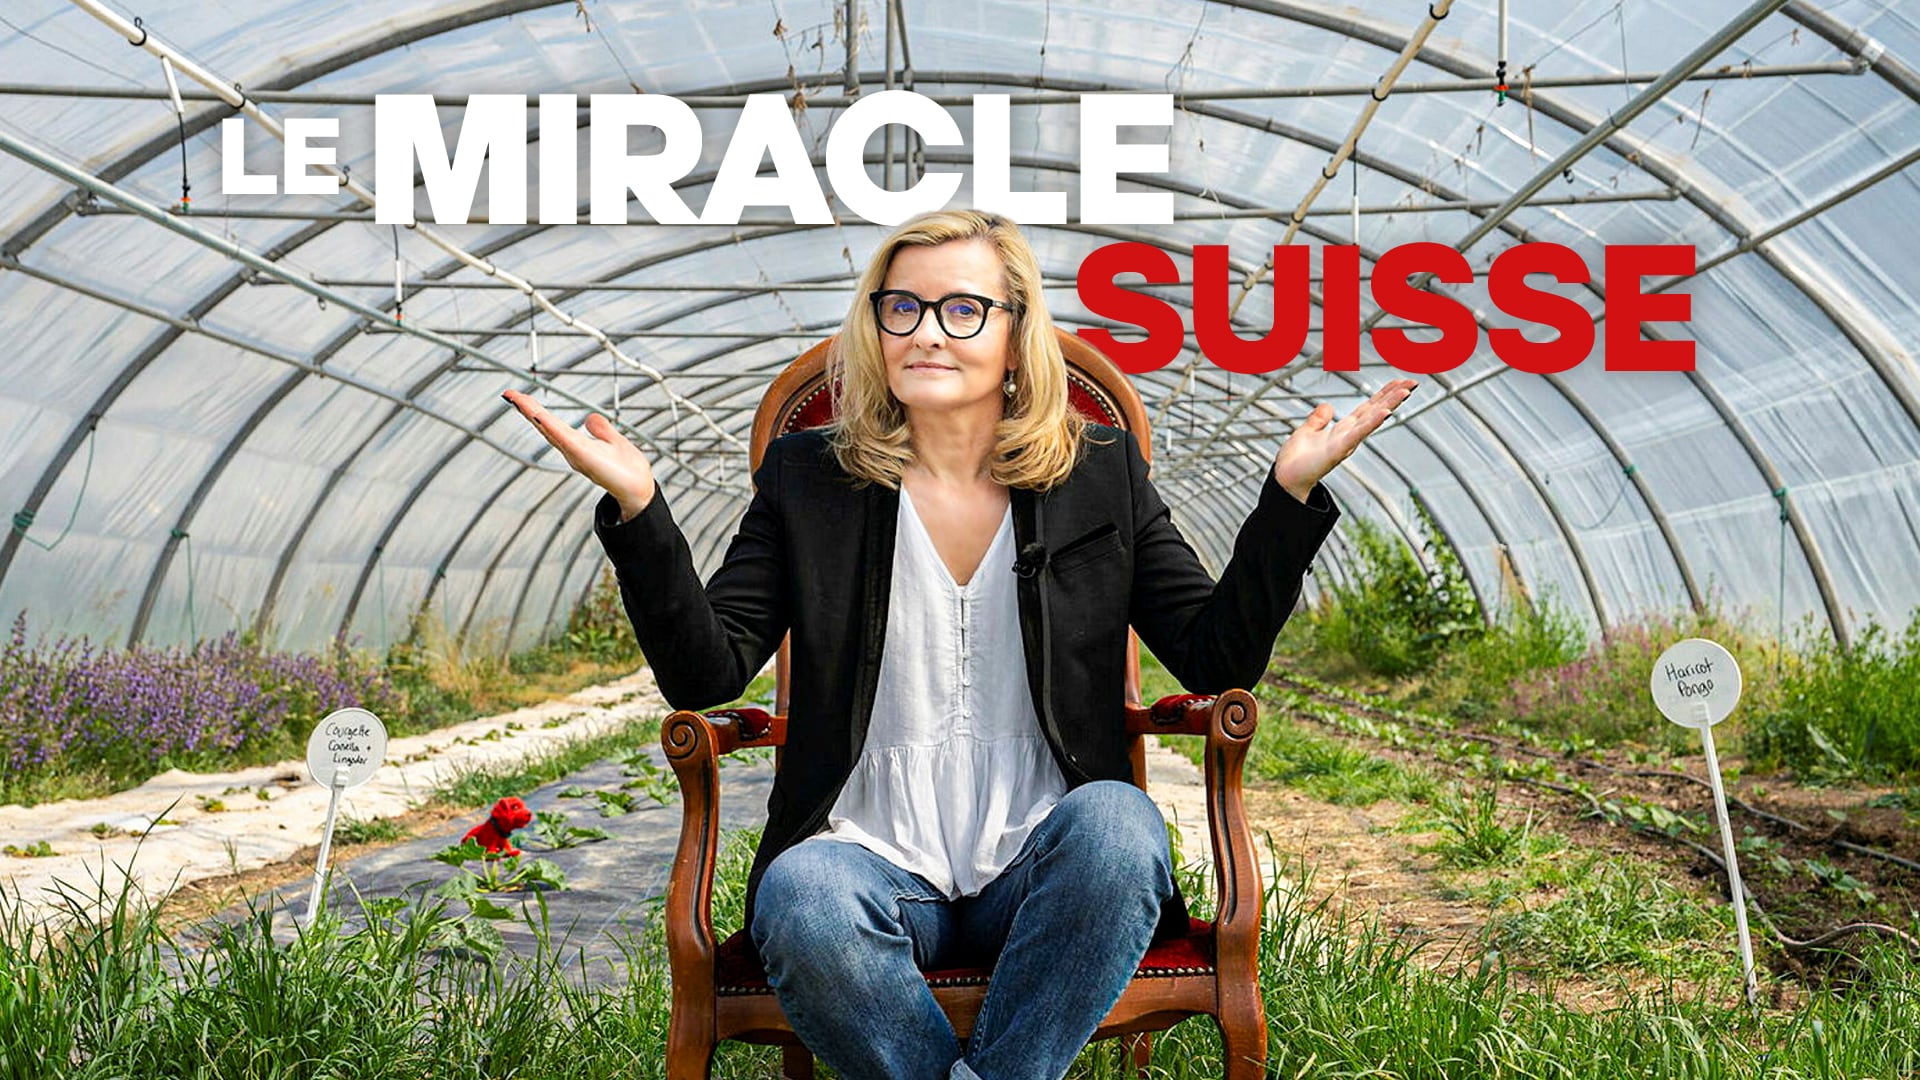 Le Miracle Suisse